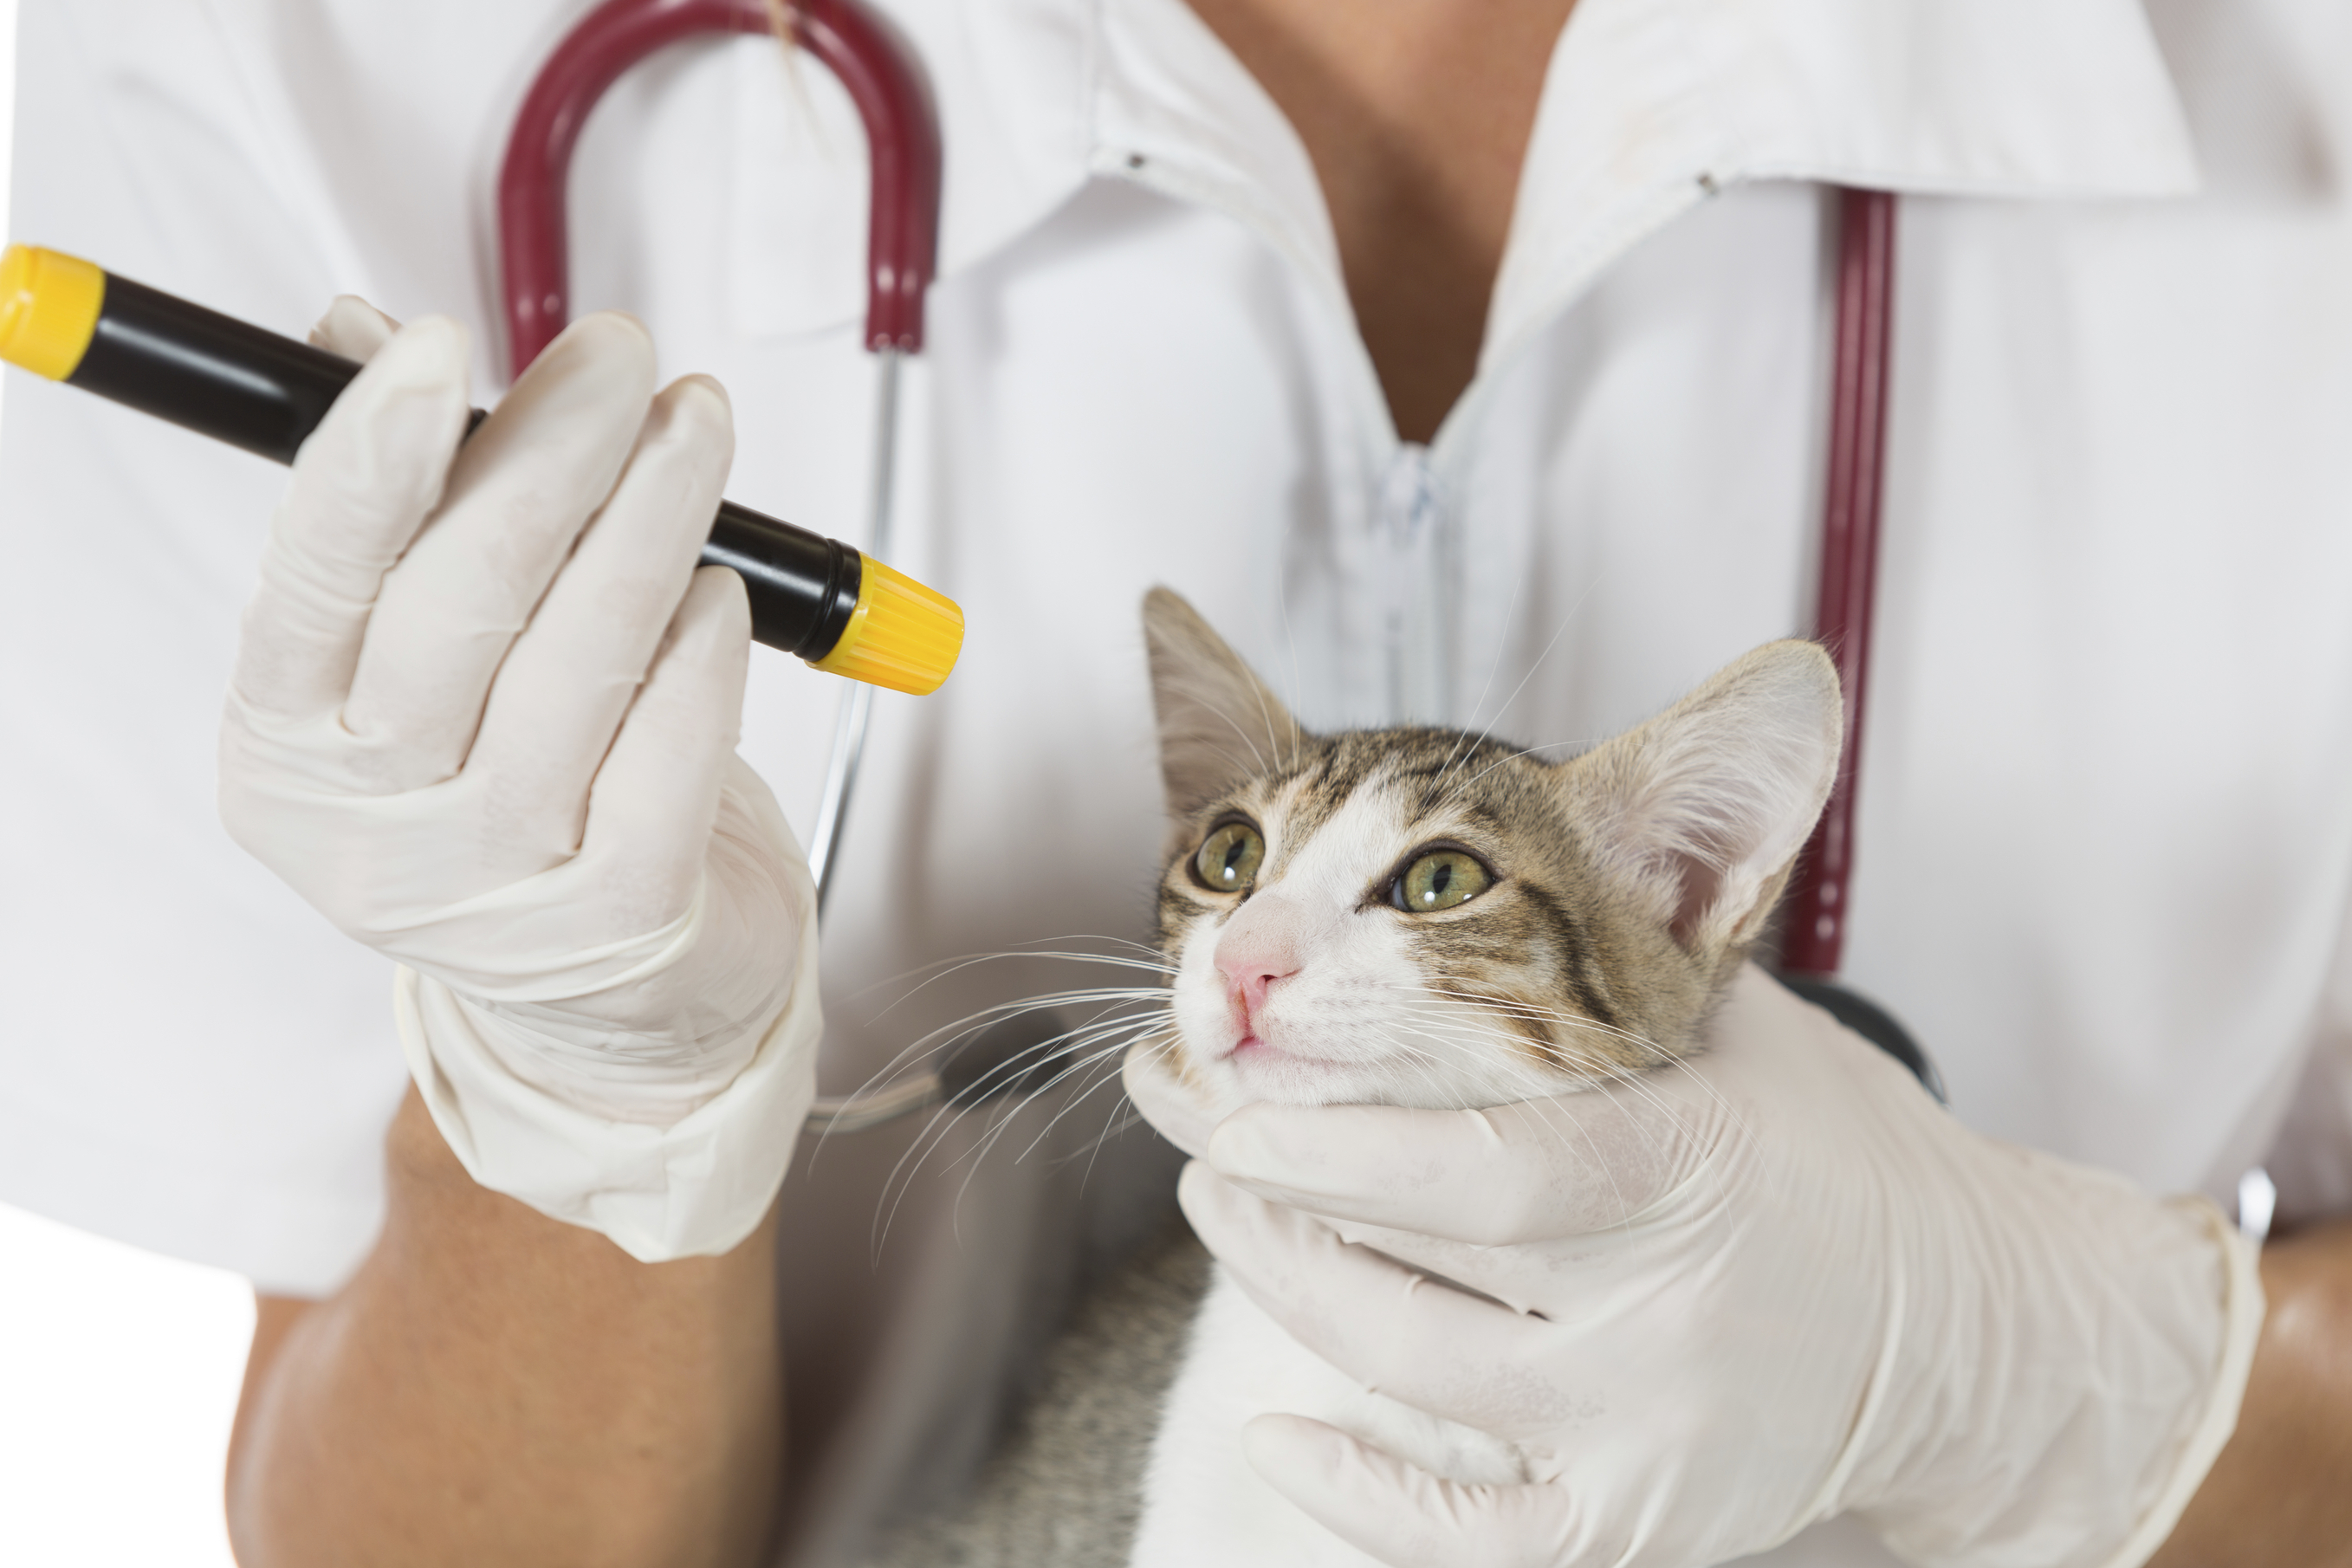 Acyclovir 3% ophthalmic ointment compounded for cats.